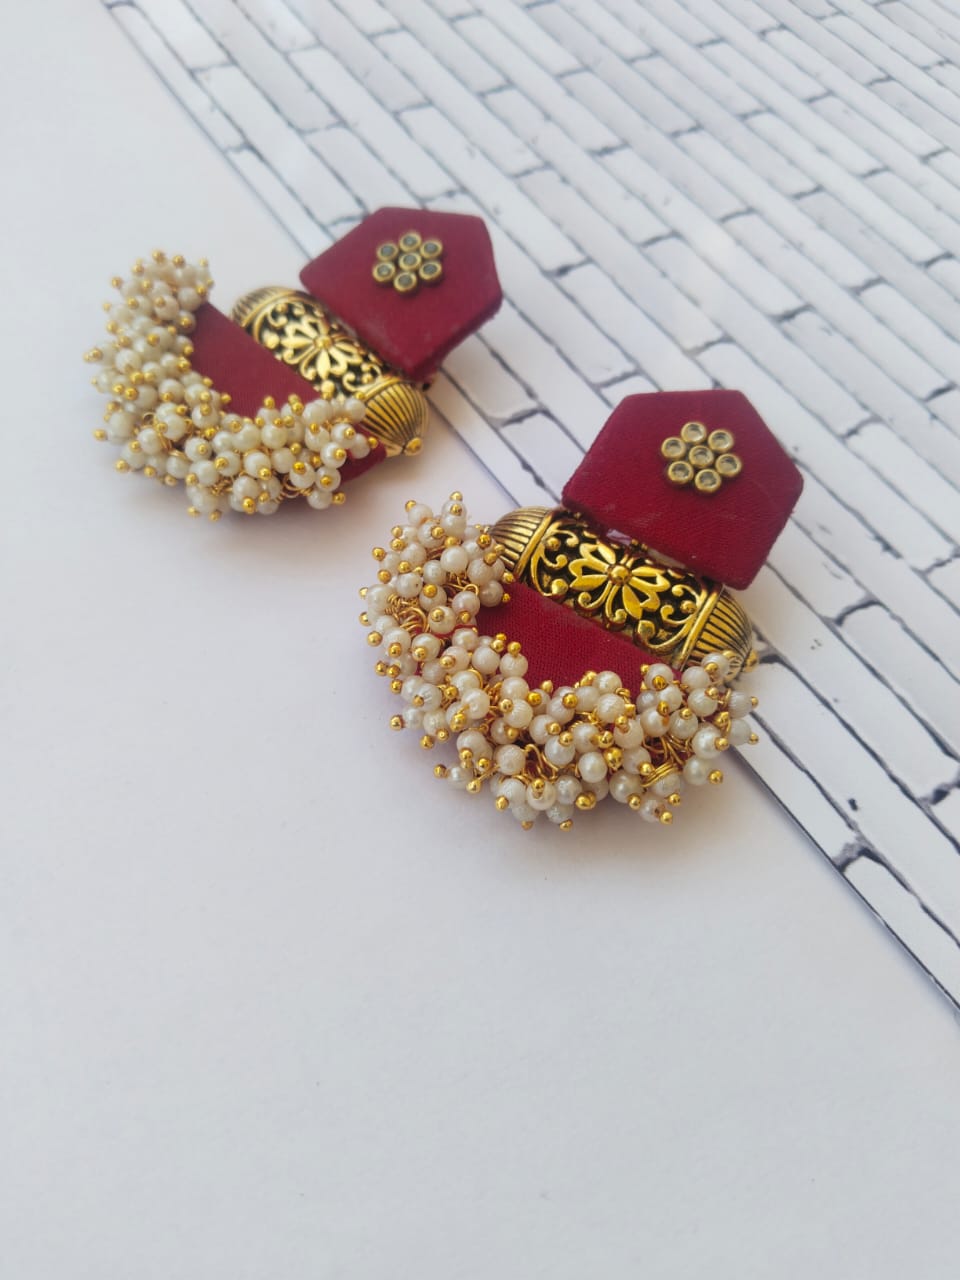 Maroon jhumka earrings with white beads and golden tabiz on white backdrop